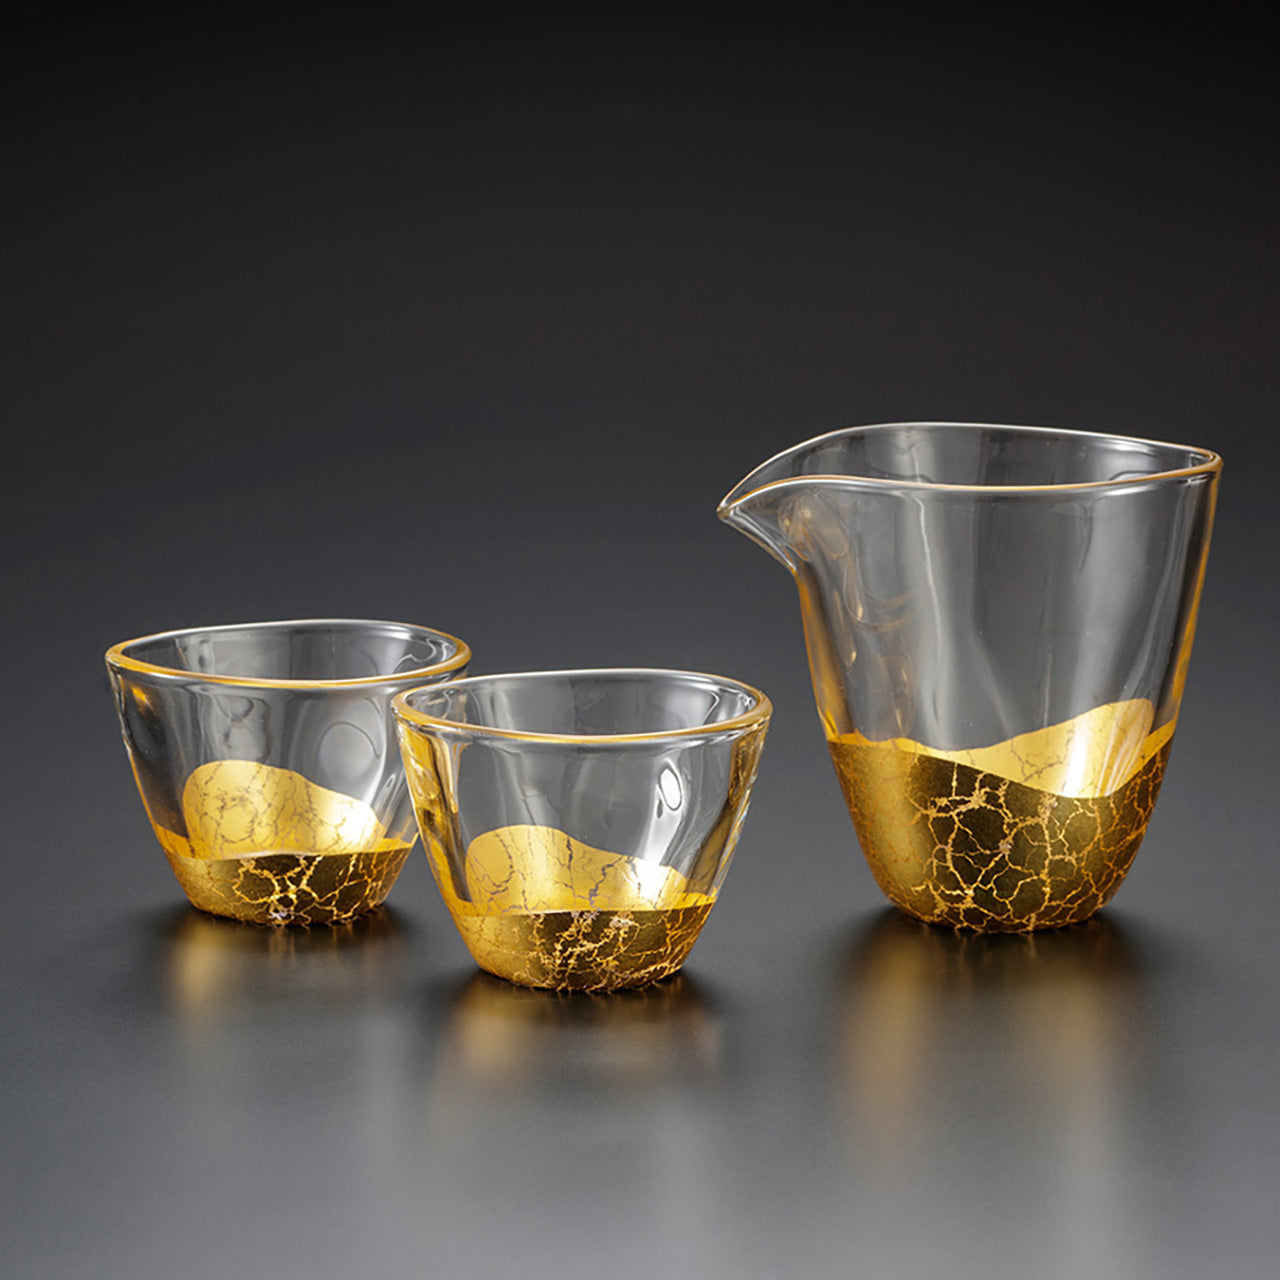 Drinking vessel, Cracking Lipped bowl and Large sake cup - Glass Kanazawa gold leaf, Craft material